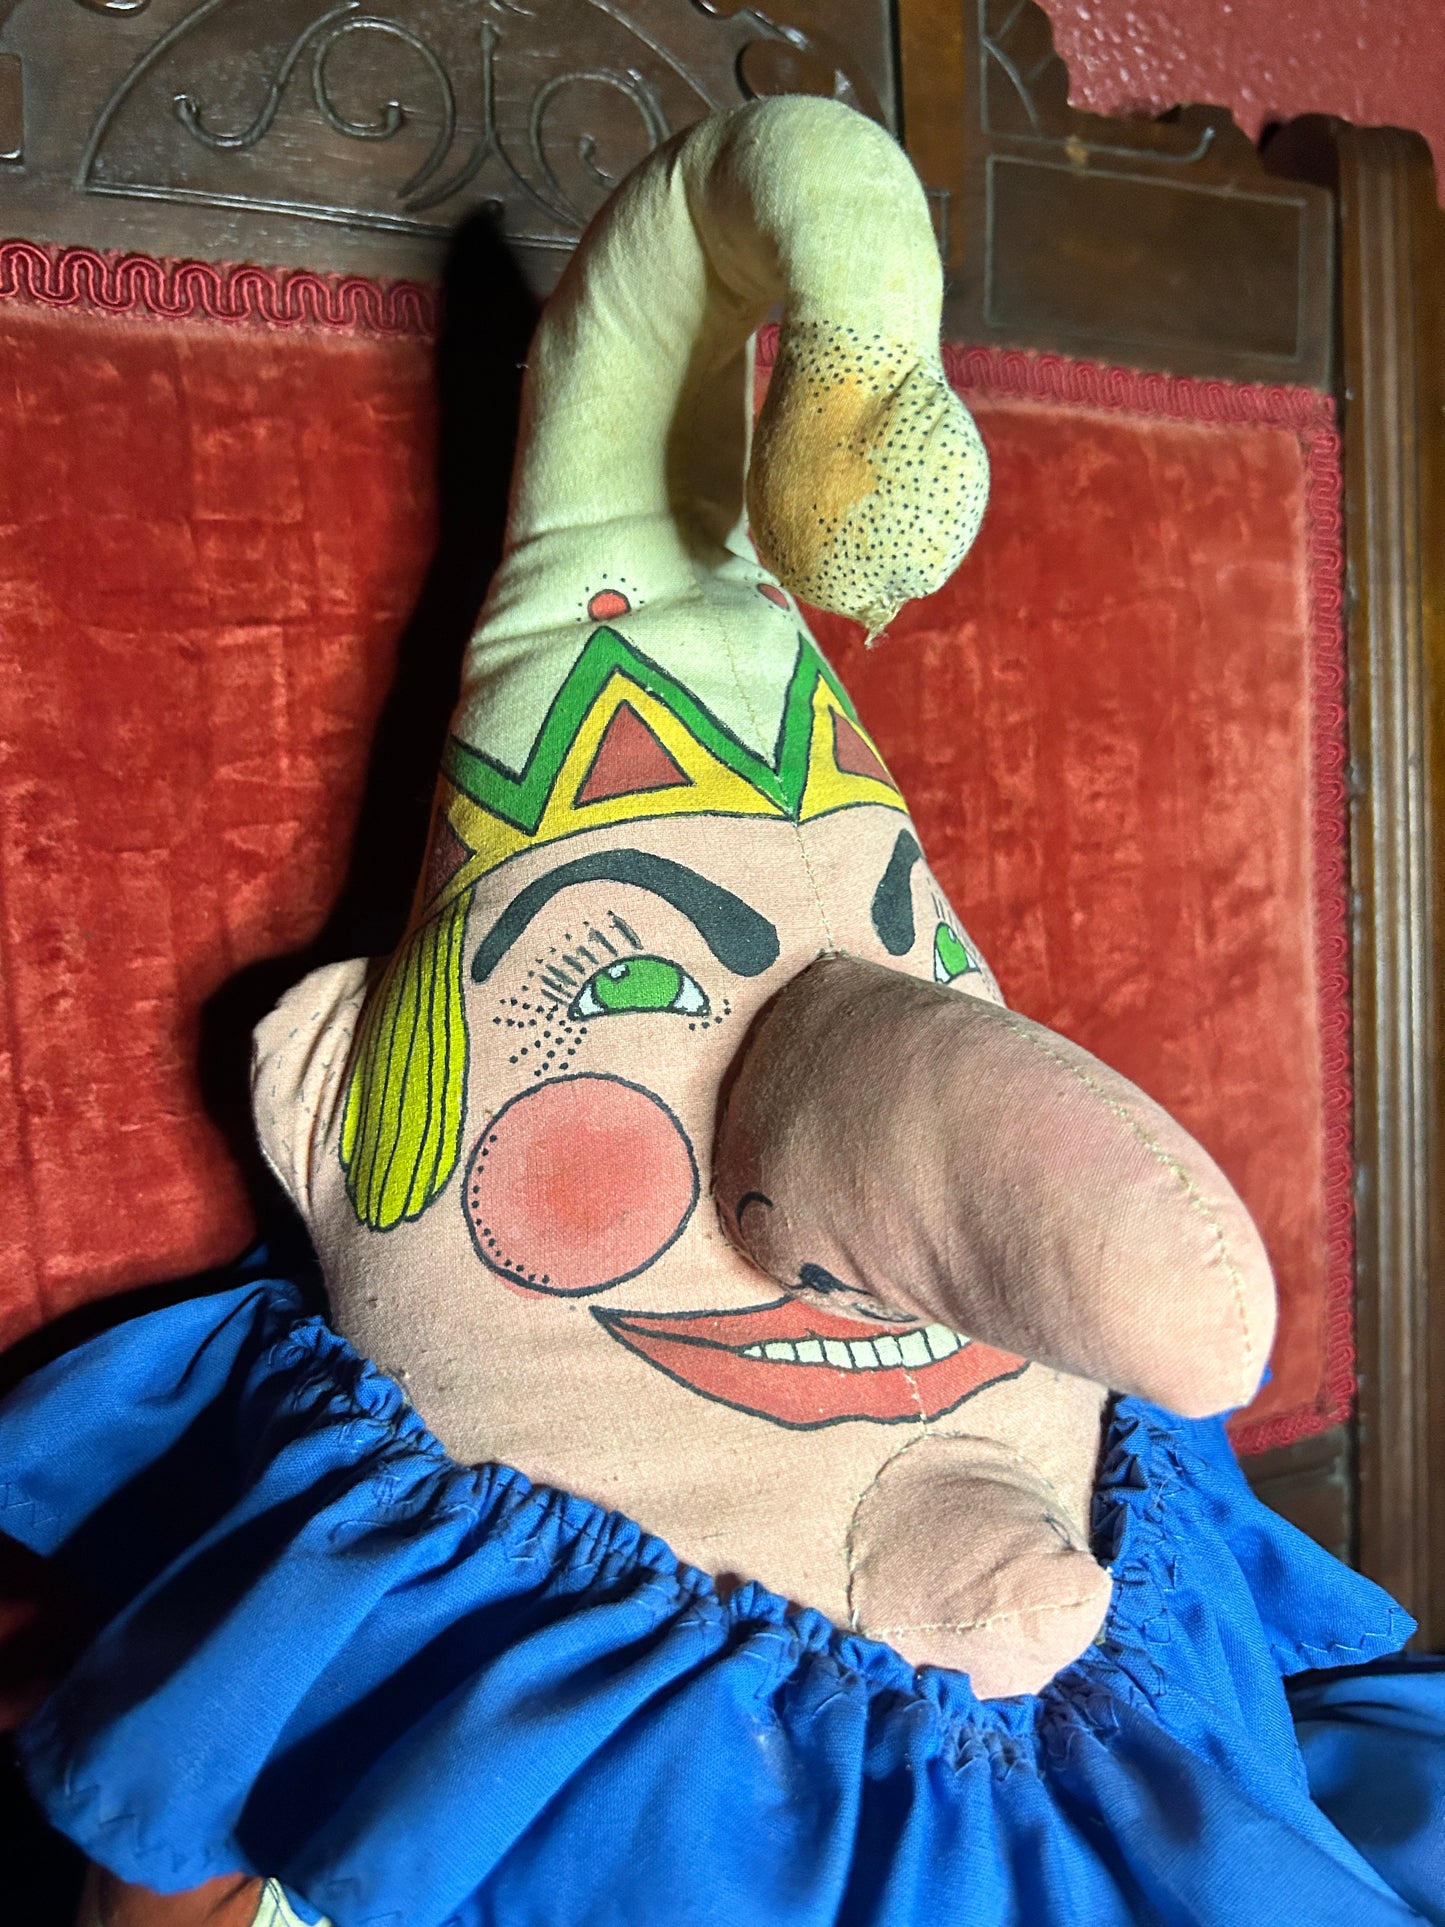 Large Jester Clown Doll